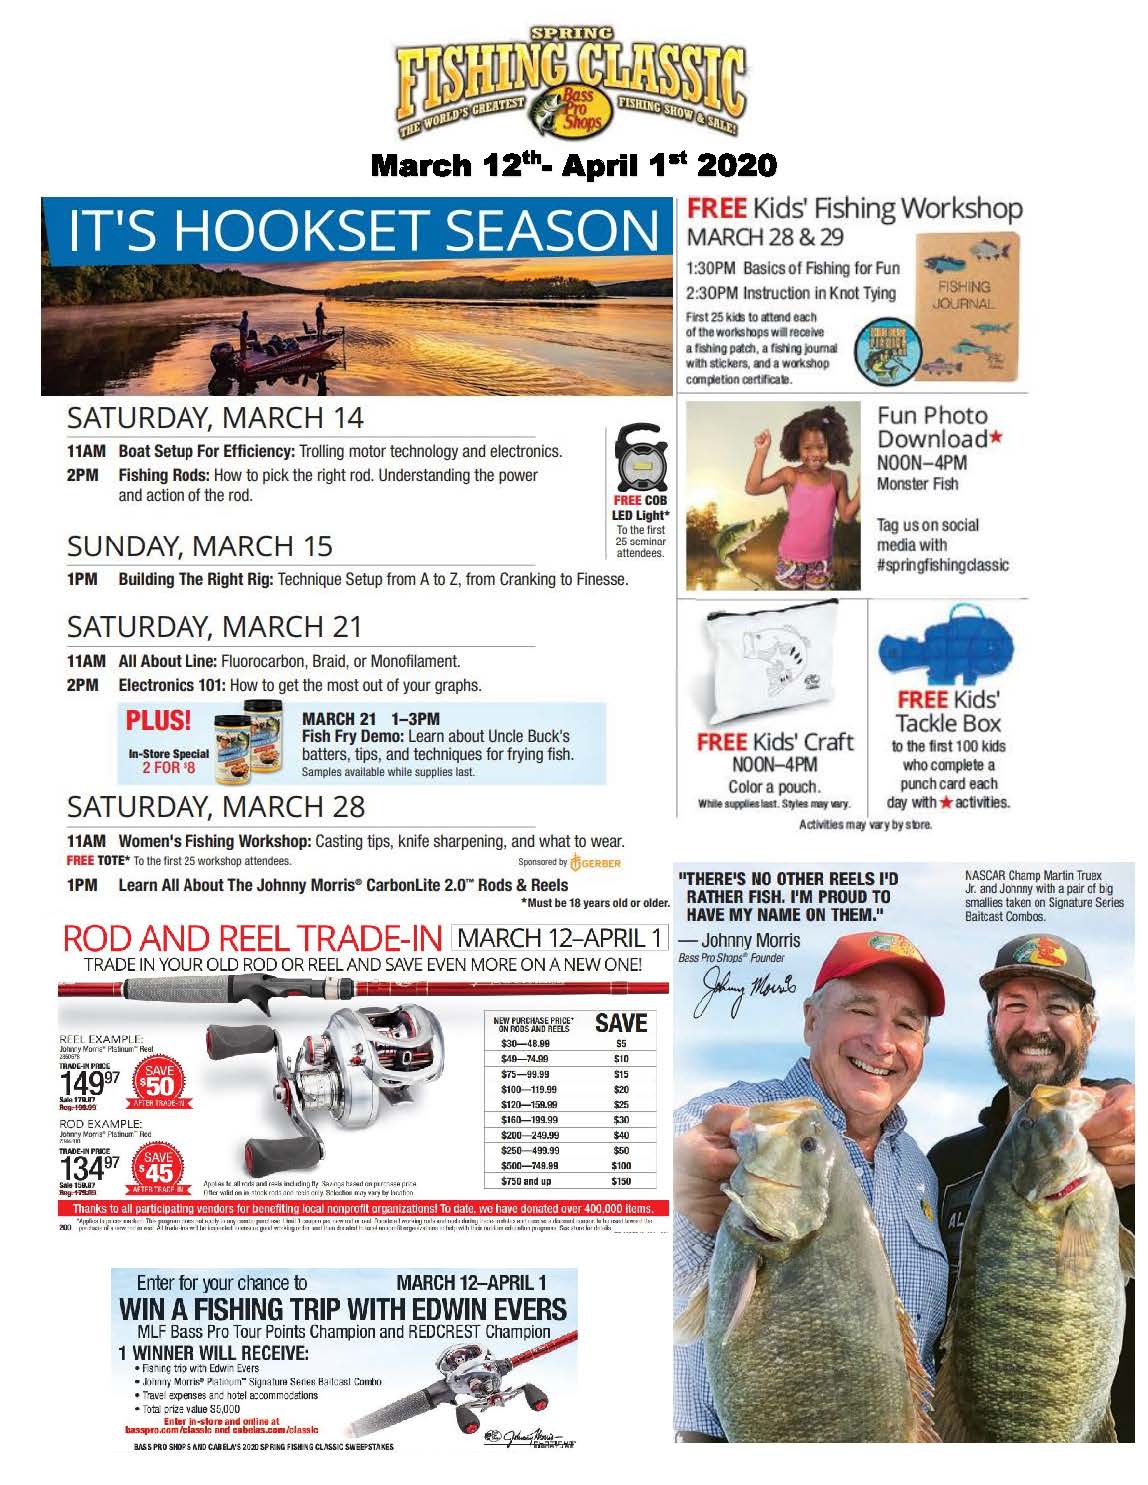 Spring Fishing Classic with Bass Pro Shops*** Shop Harrisburg Mall